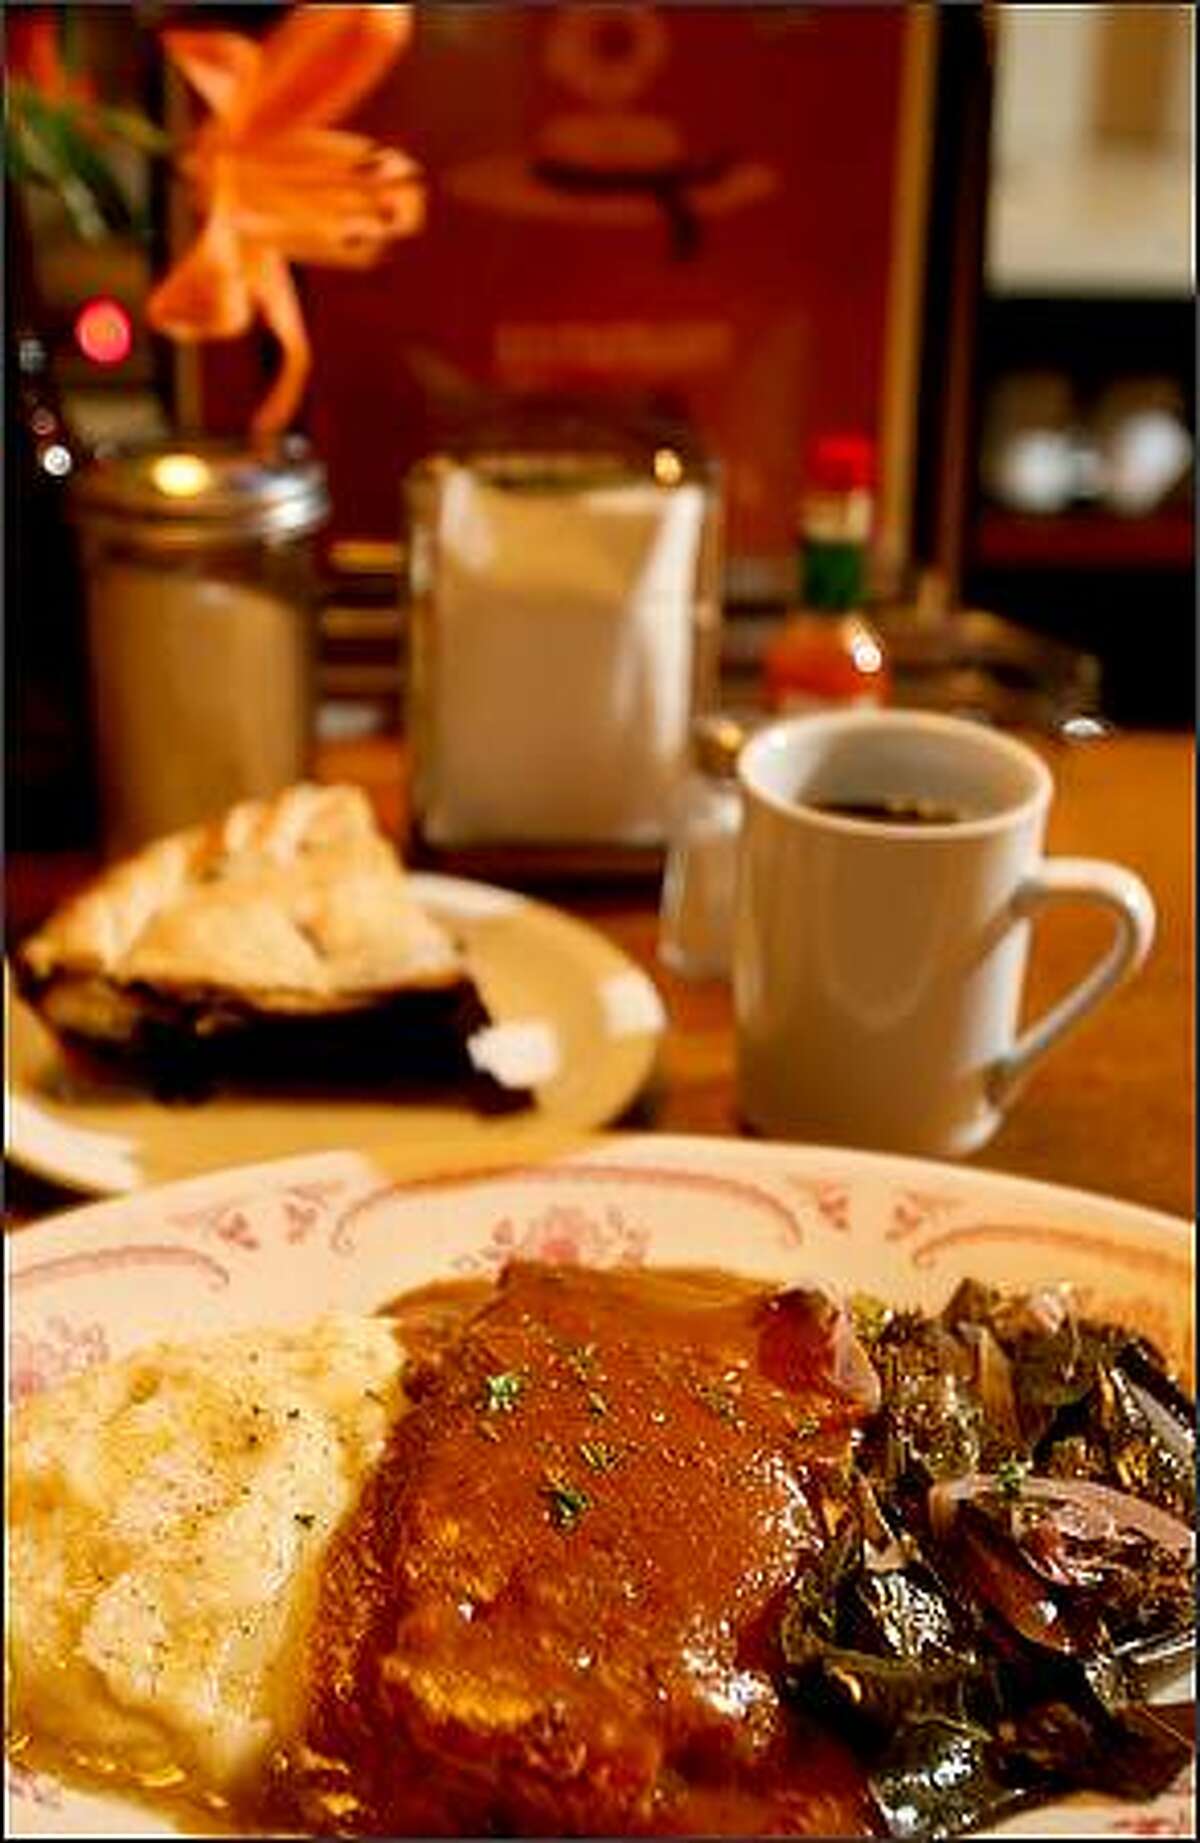 Classic comfort food from Hattie's Hat Restaurant in Ballard includes garlic mashed potatoes, meatloaf and braised greens with blueberry pie and coffee, Wednesday November 19, 2008.